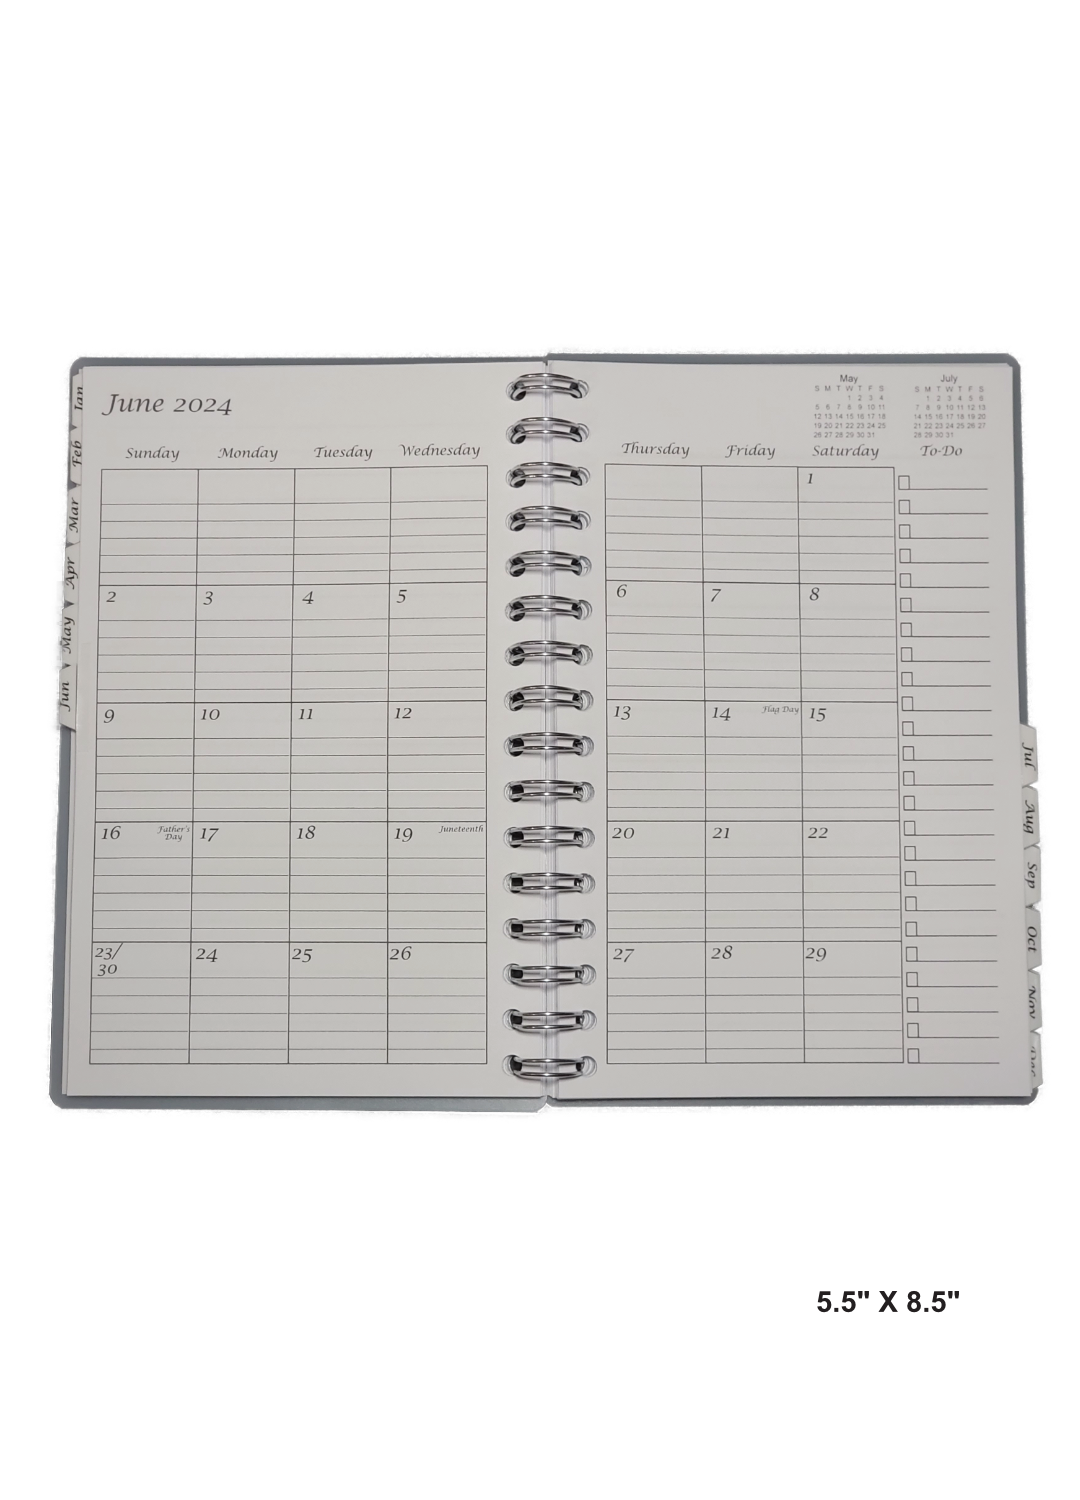 Inside view of a 5.5" x 8.5" hand-made 12 month planner with a clean and organized layout. Each month has dedicated pages with ample writing space and clear headings. A practical and visually appealing tool for staying organized.